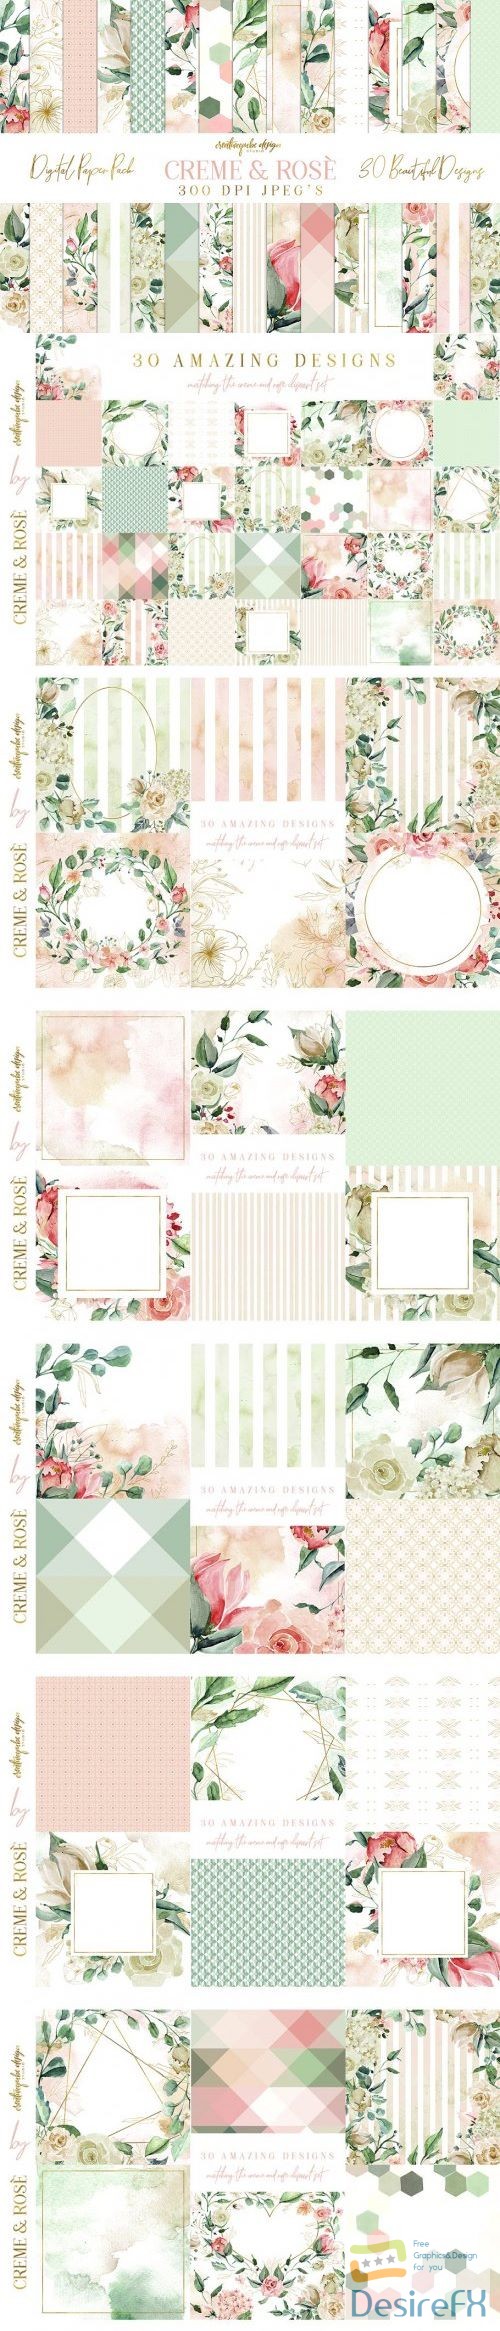 Creme and Rose Digital Papers - 2777538